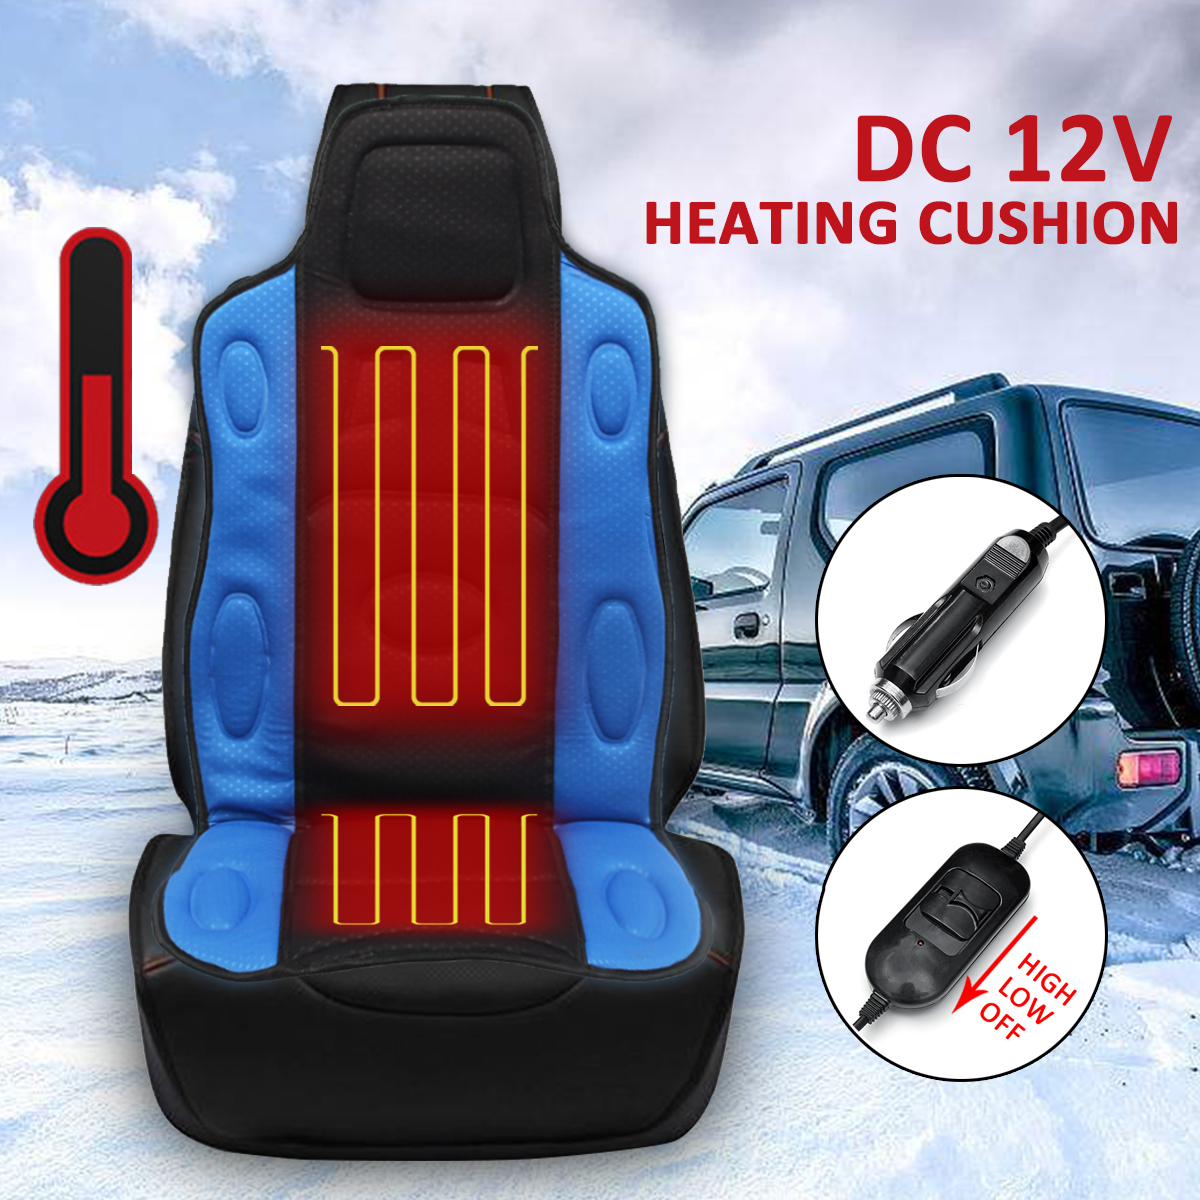 12V-Car-Seat-Heated-Cushion-Seat-Warmer-Winter-Household-Cover-Electric-Heating-Mat-Black-and-Blue-1387674